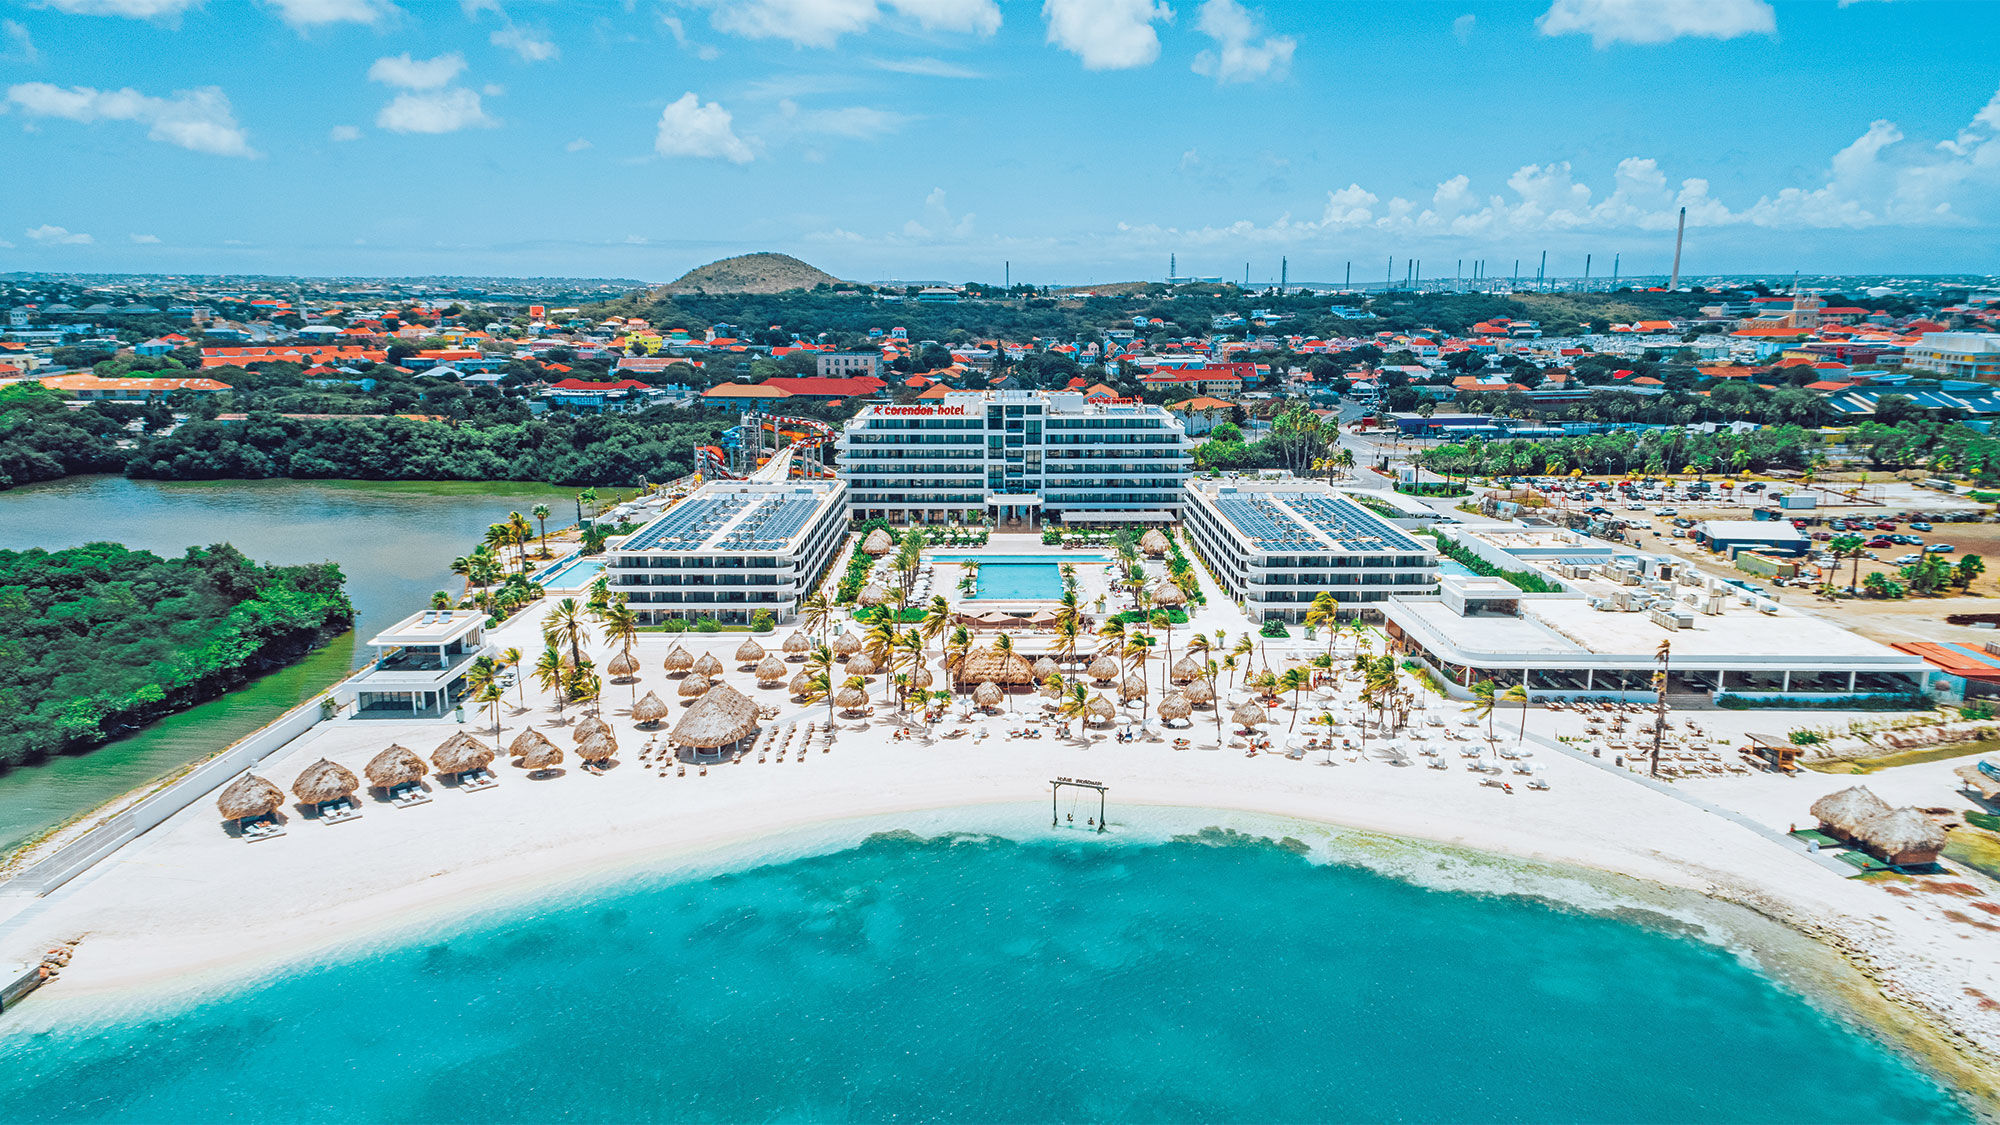 The Mangrove Beach Corendon Curacao All-Inclusive Resort has the largest room count of any property on the island.